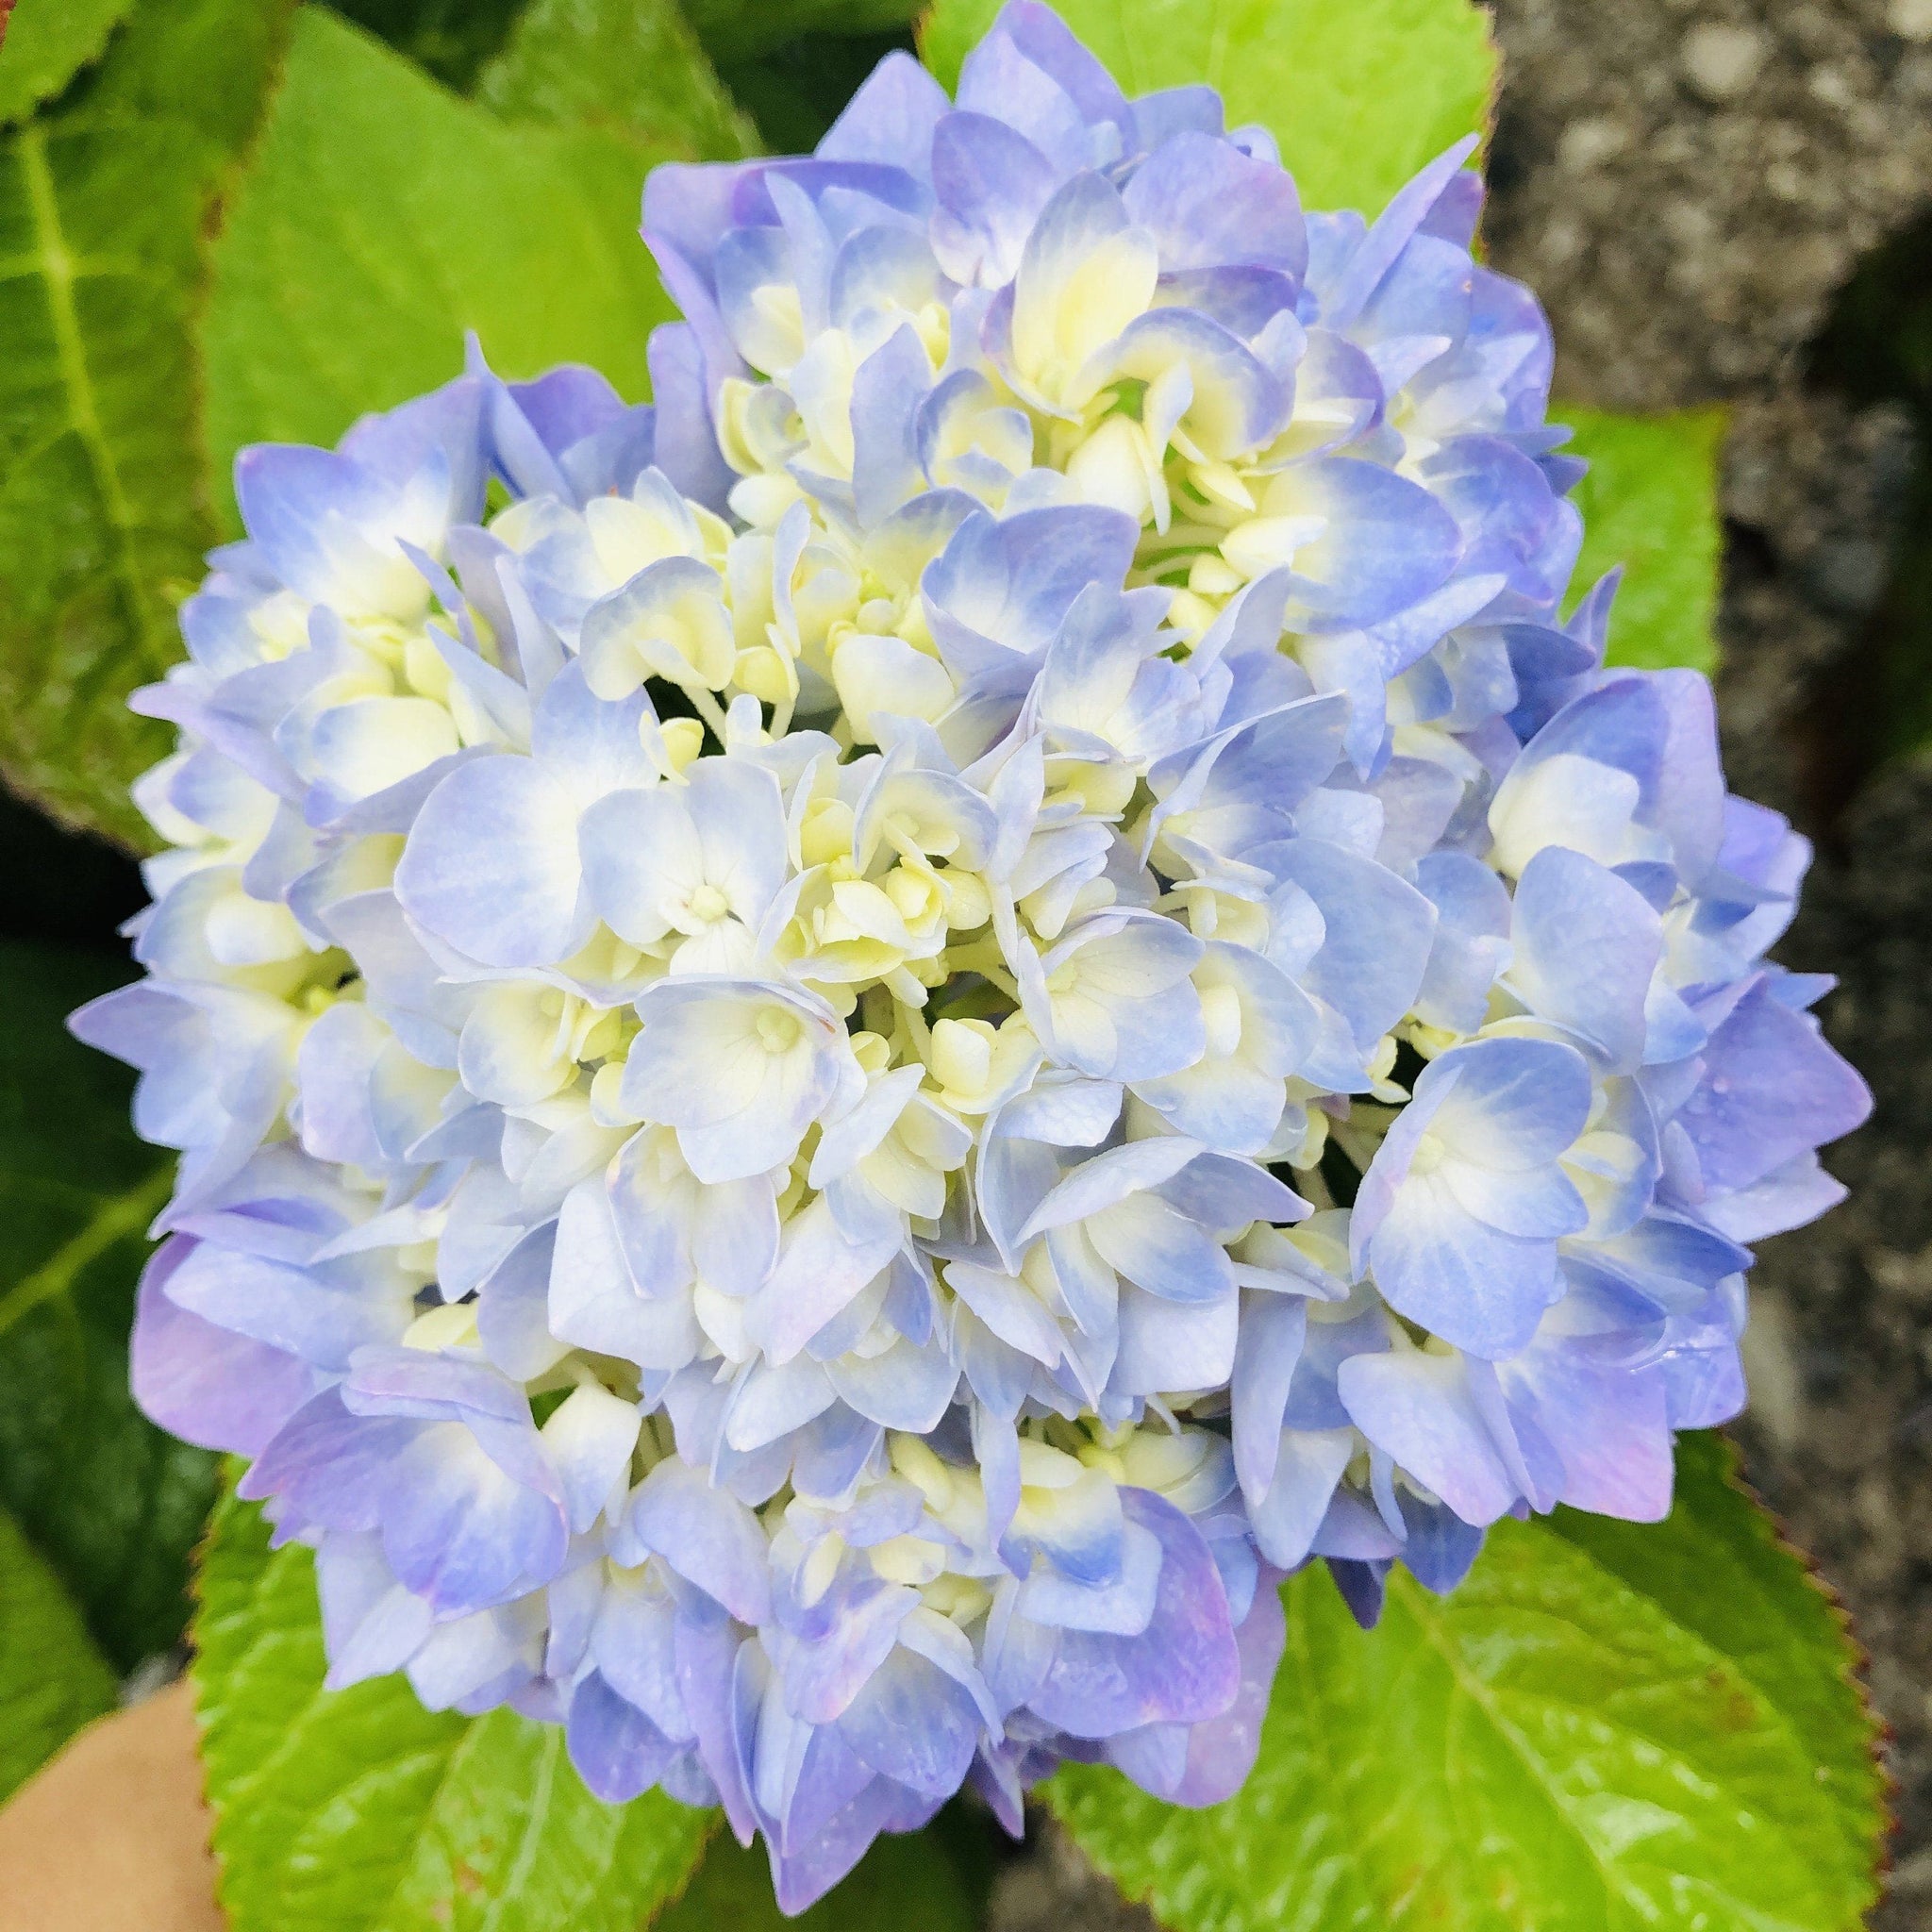 How to Grow and Care for Endless Summer Hydrangea